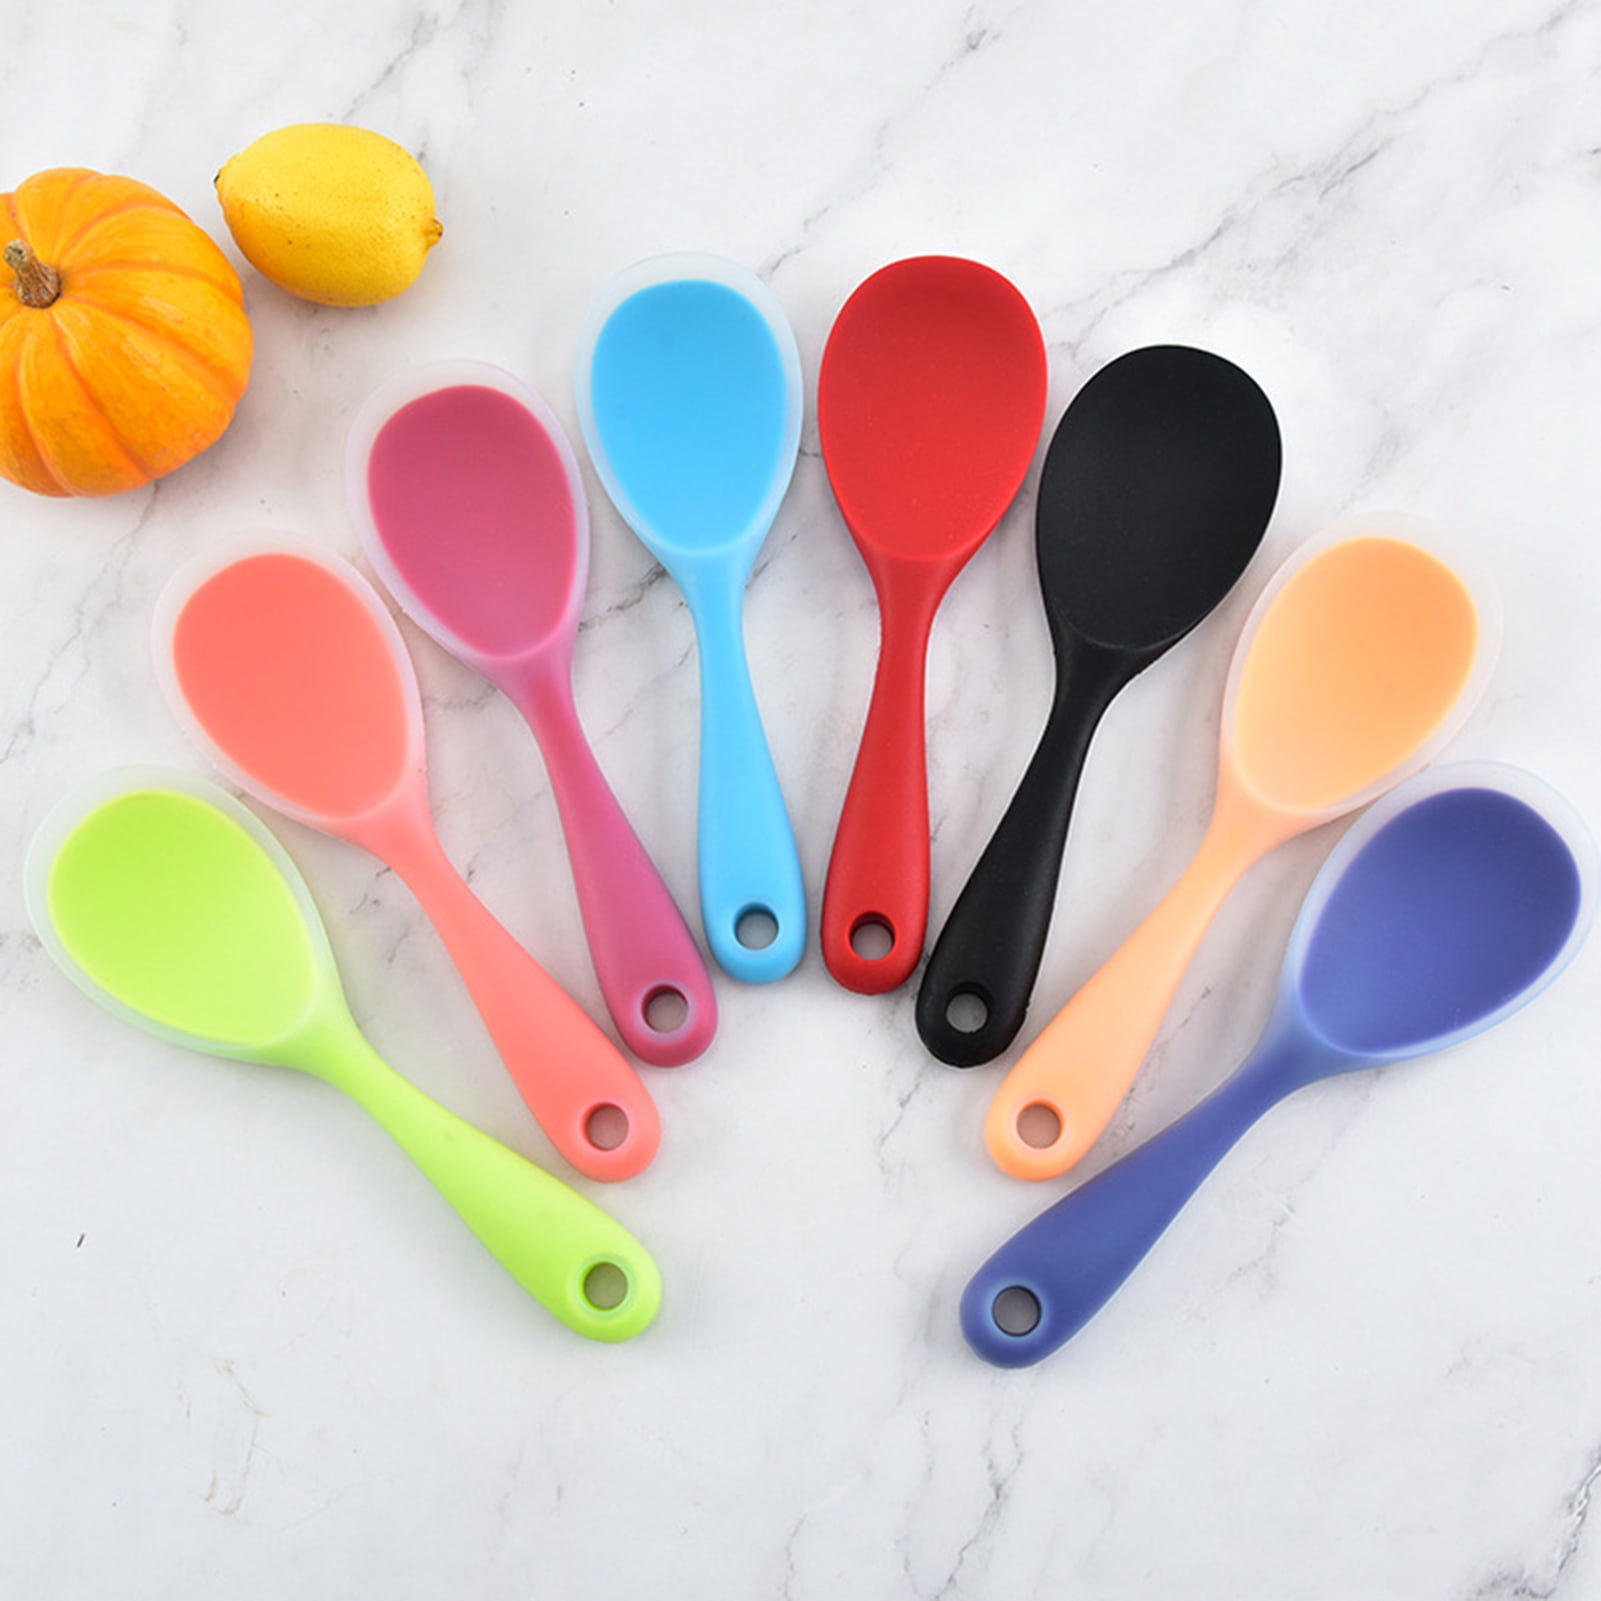 HEQUSIGNS 6 Pcs Silicone Mixing Spoons Set, Nonstick Kitchen Cooking Spoons,  Silicone Serving Stirring Spoon for Kitchen Cooking Baking Utensils 